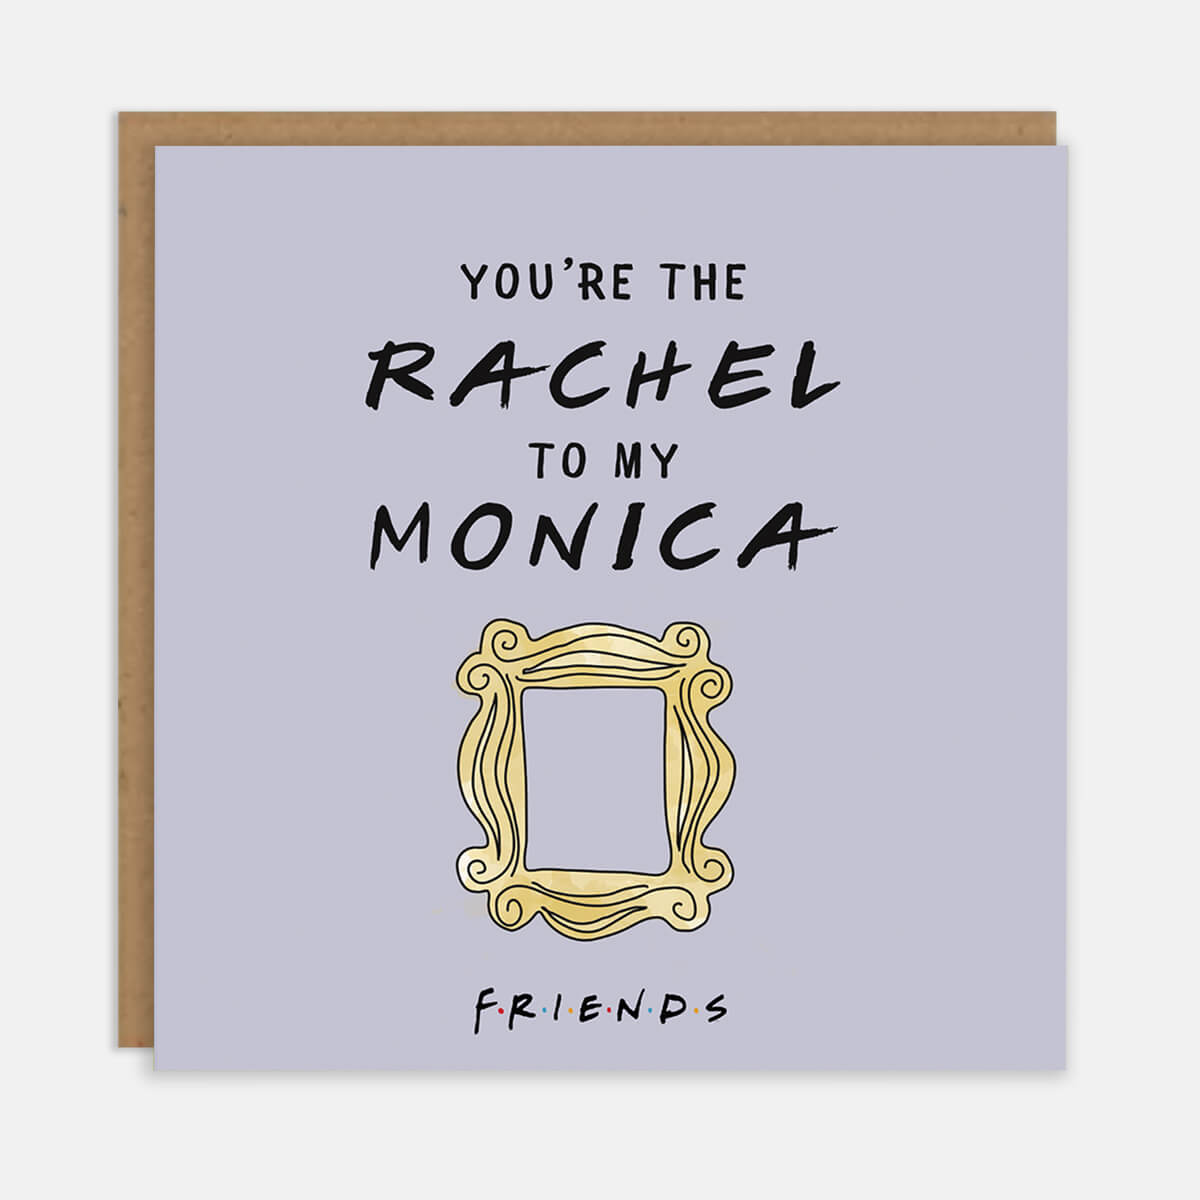 Friends TV Show Friendship or Galentines Day Card which reads "You're The Rachel To My Monica" - pastel purple with watercolour yellow frame